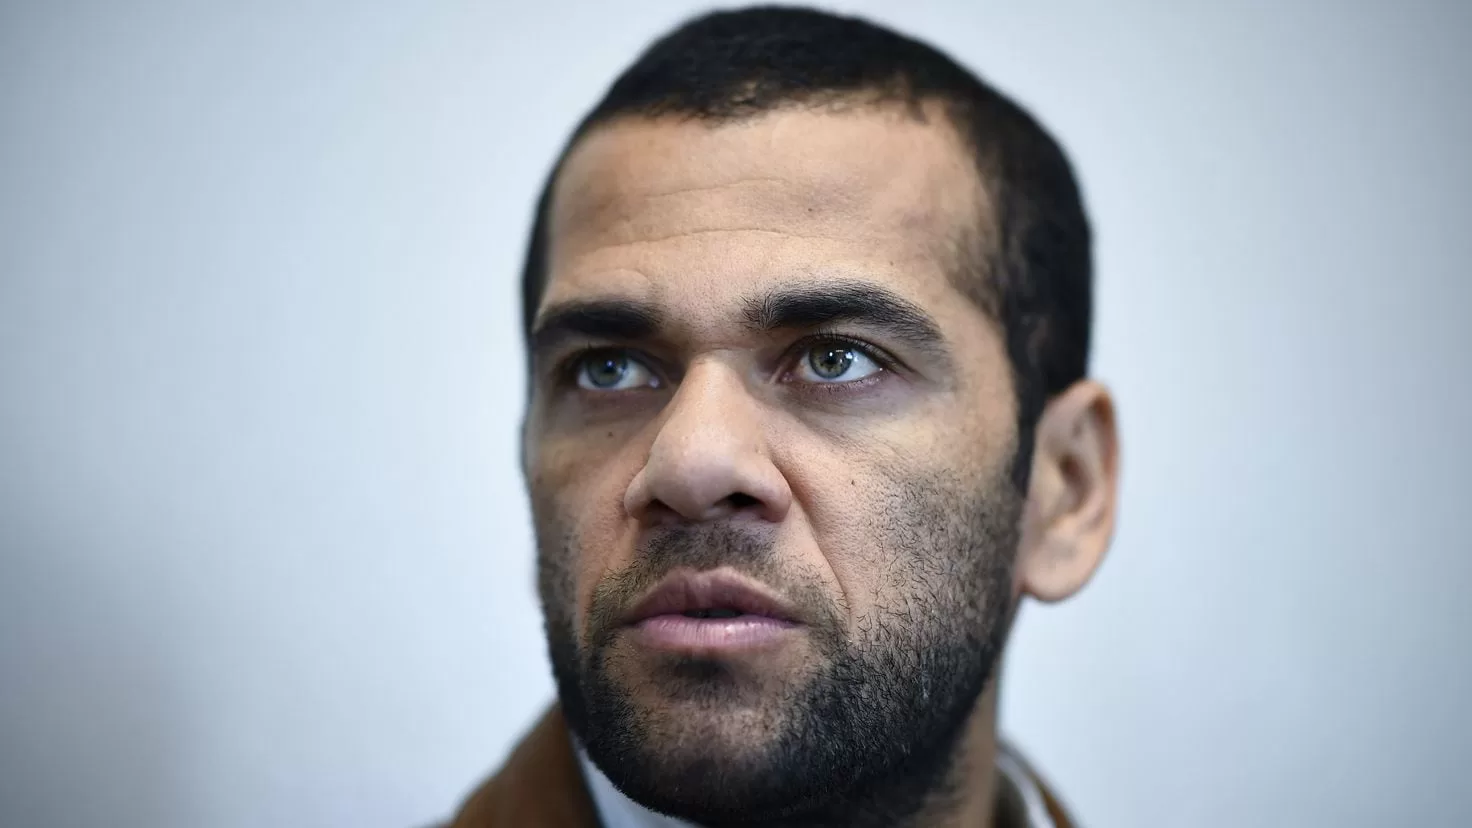 Brazil explodes over Alves' conviction: It is soft in the face of such an atrocity
